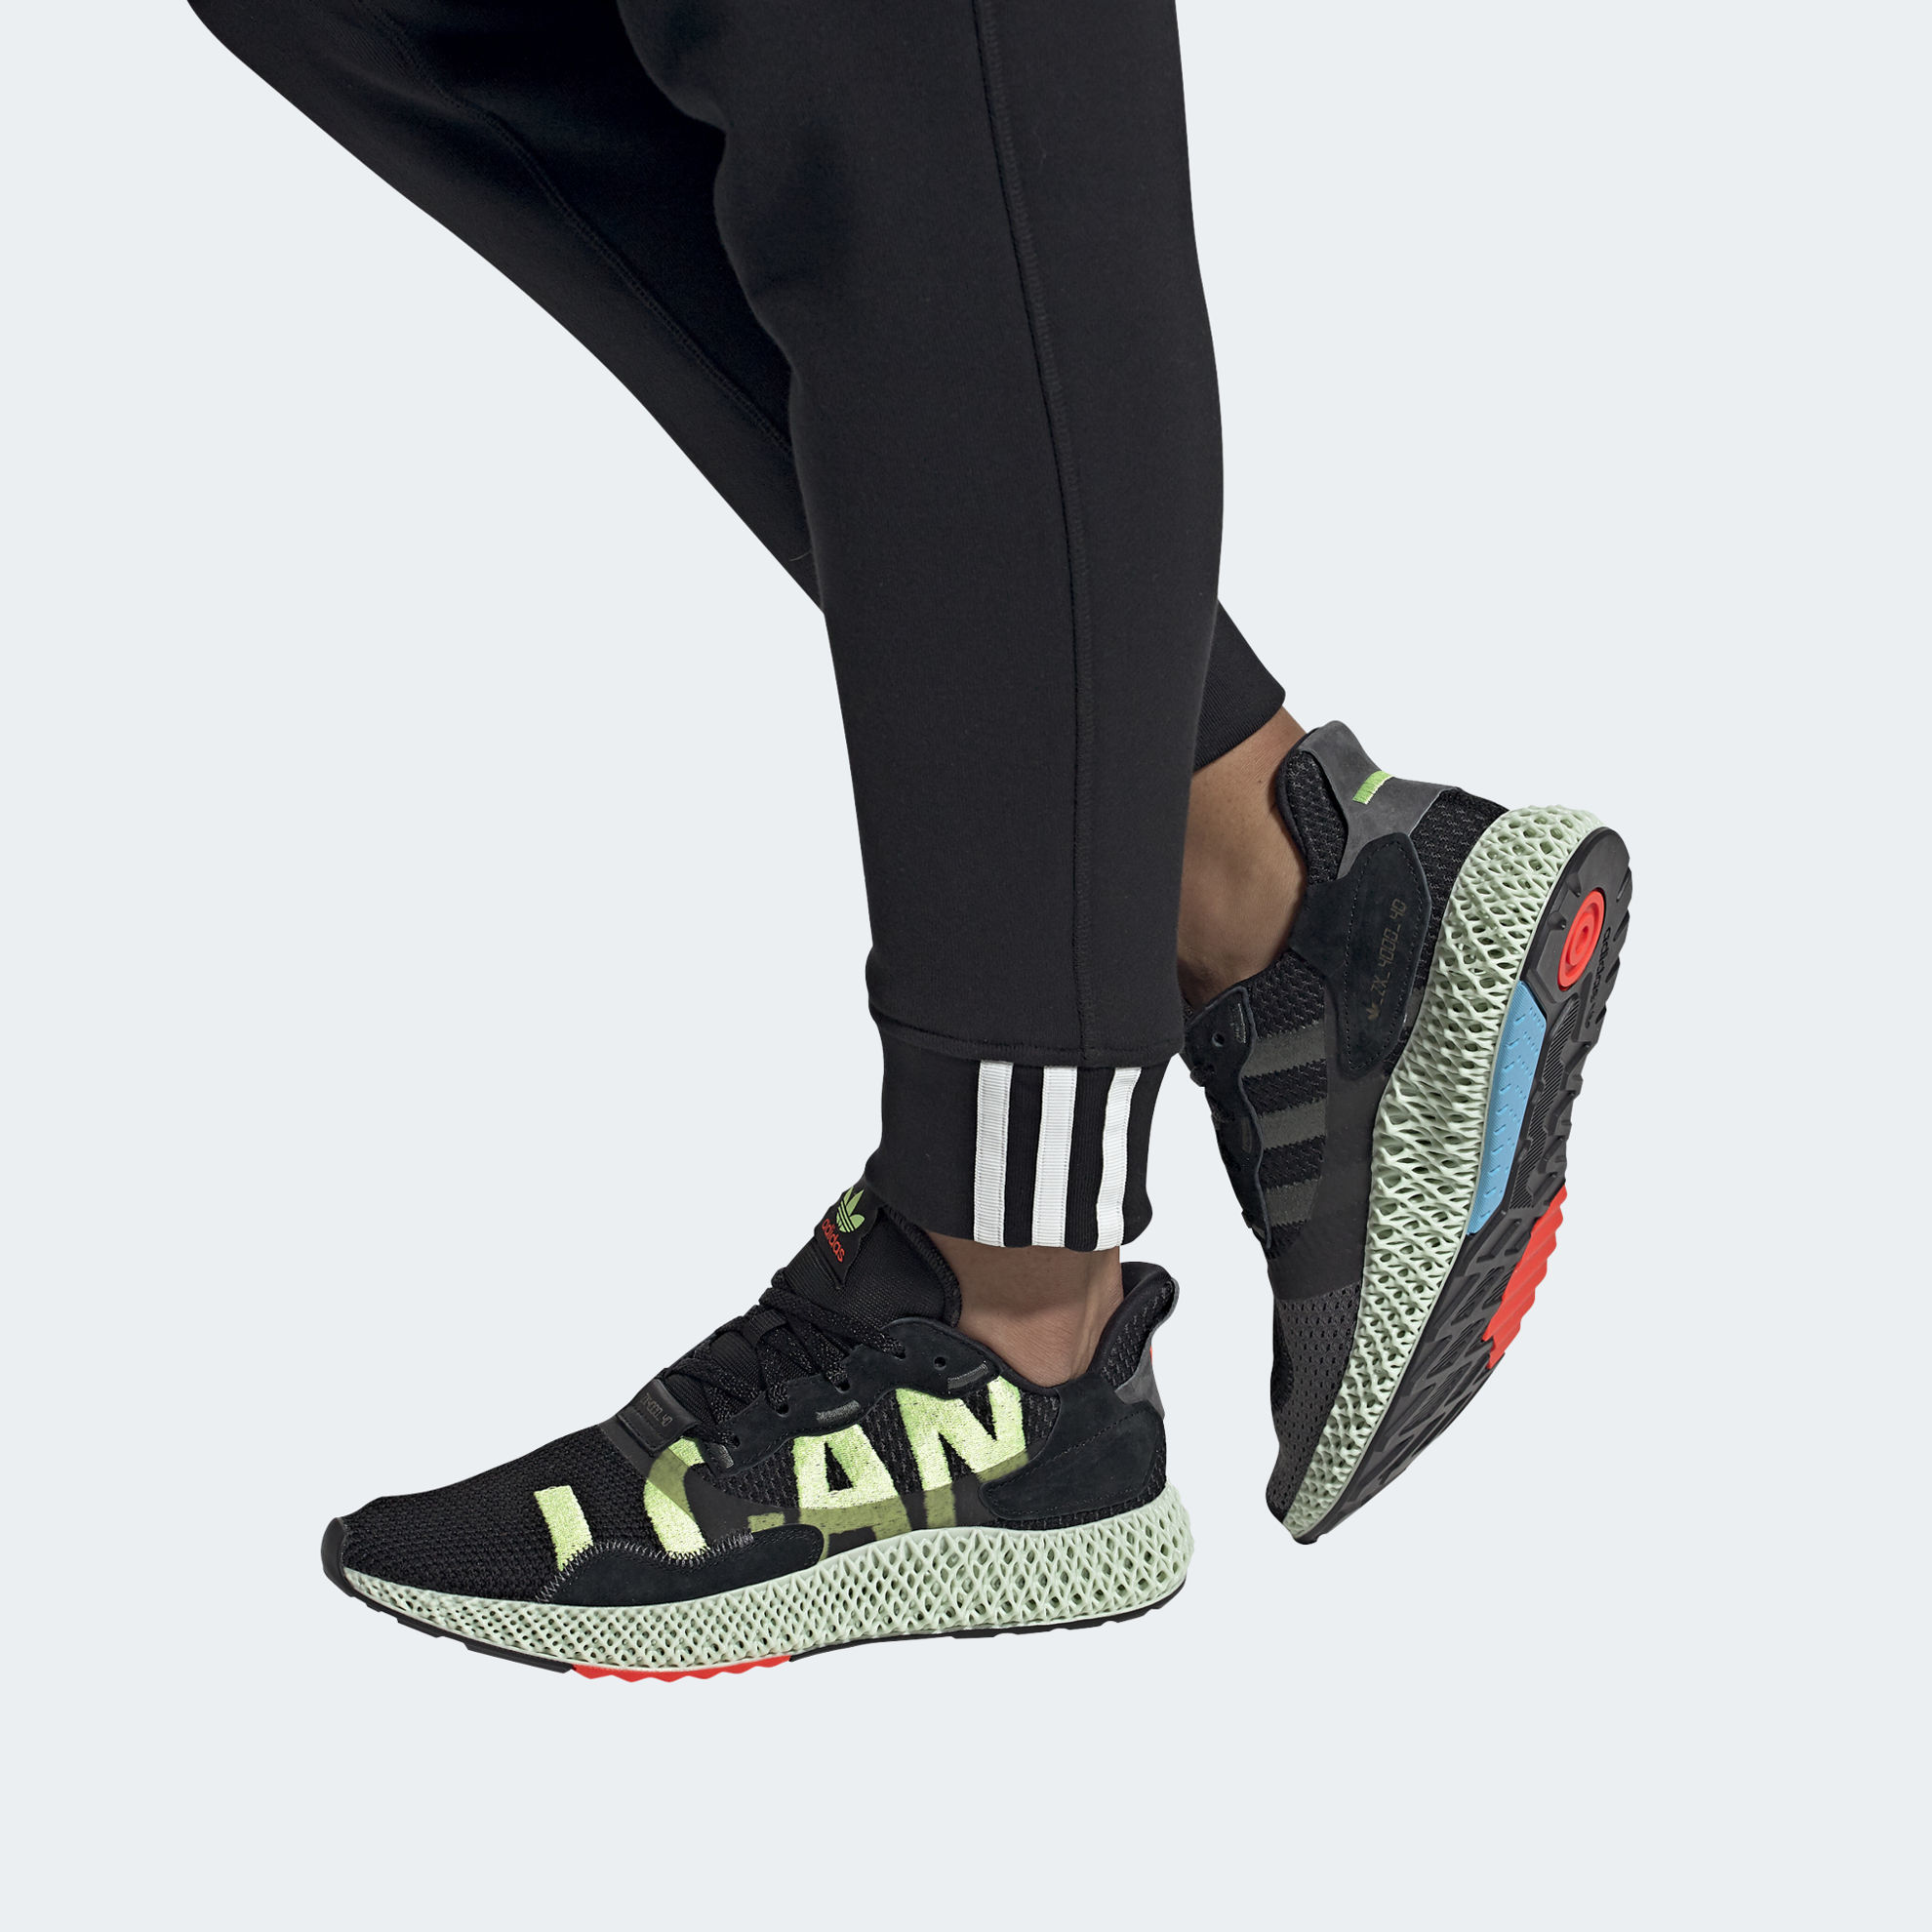 adidas ZX 4000 4D "I Want I Can" / / -